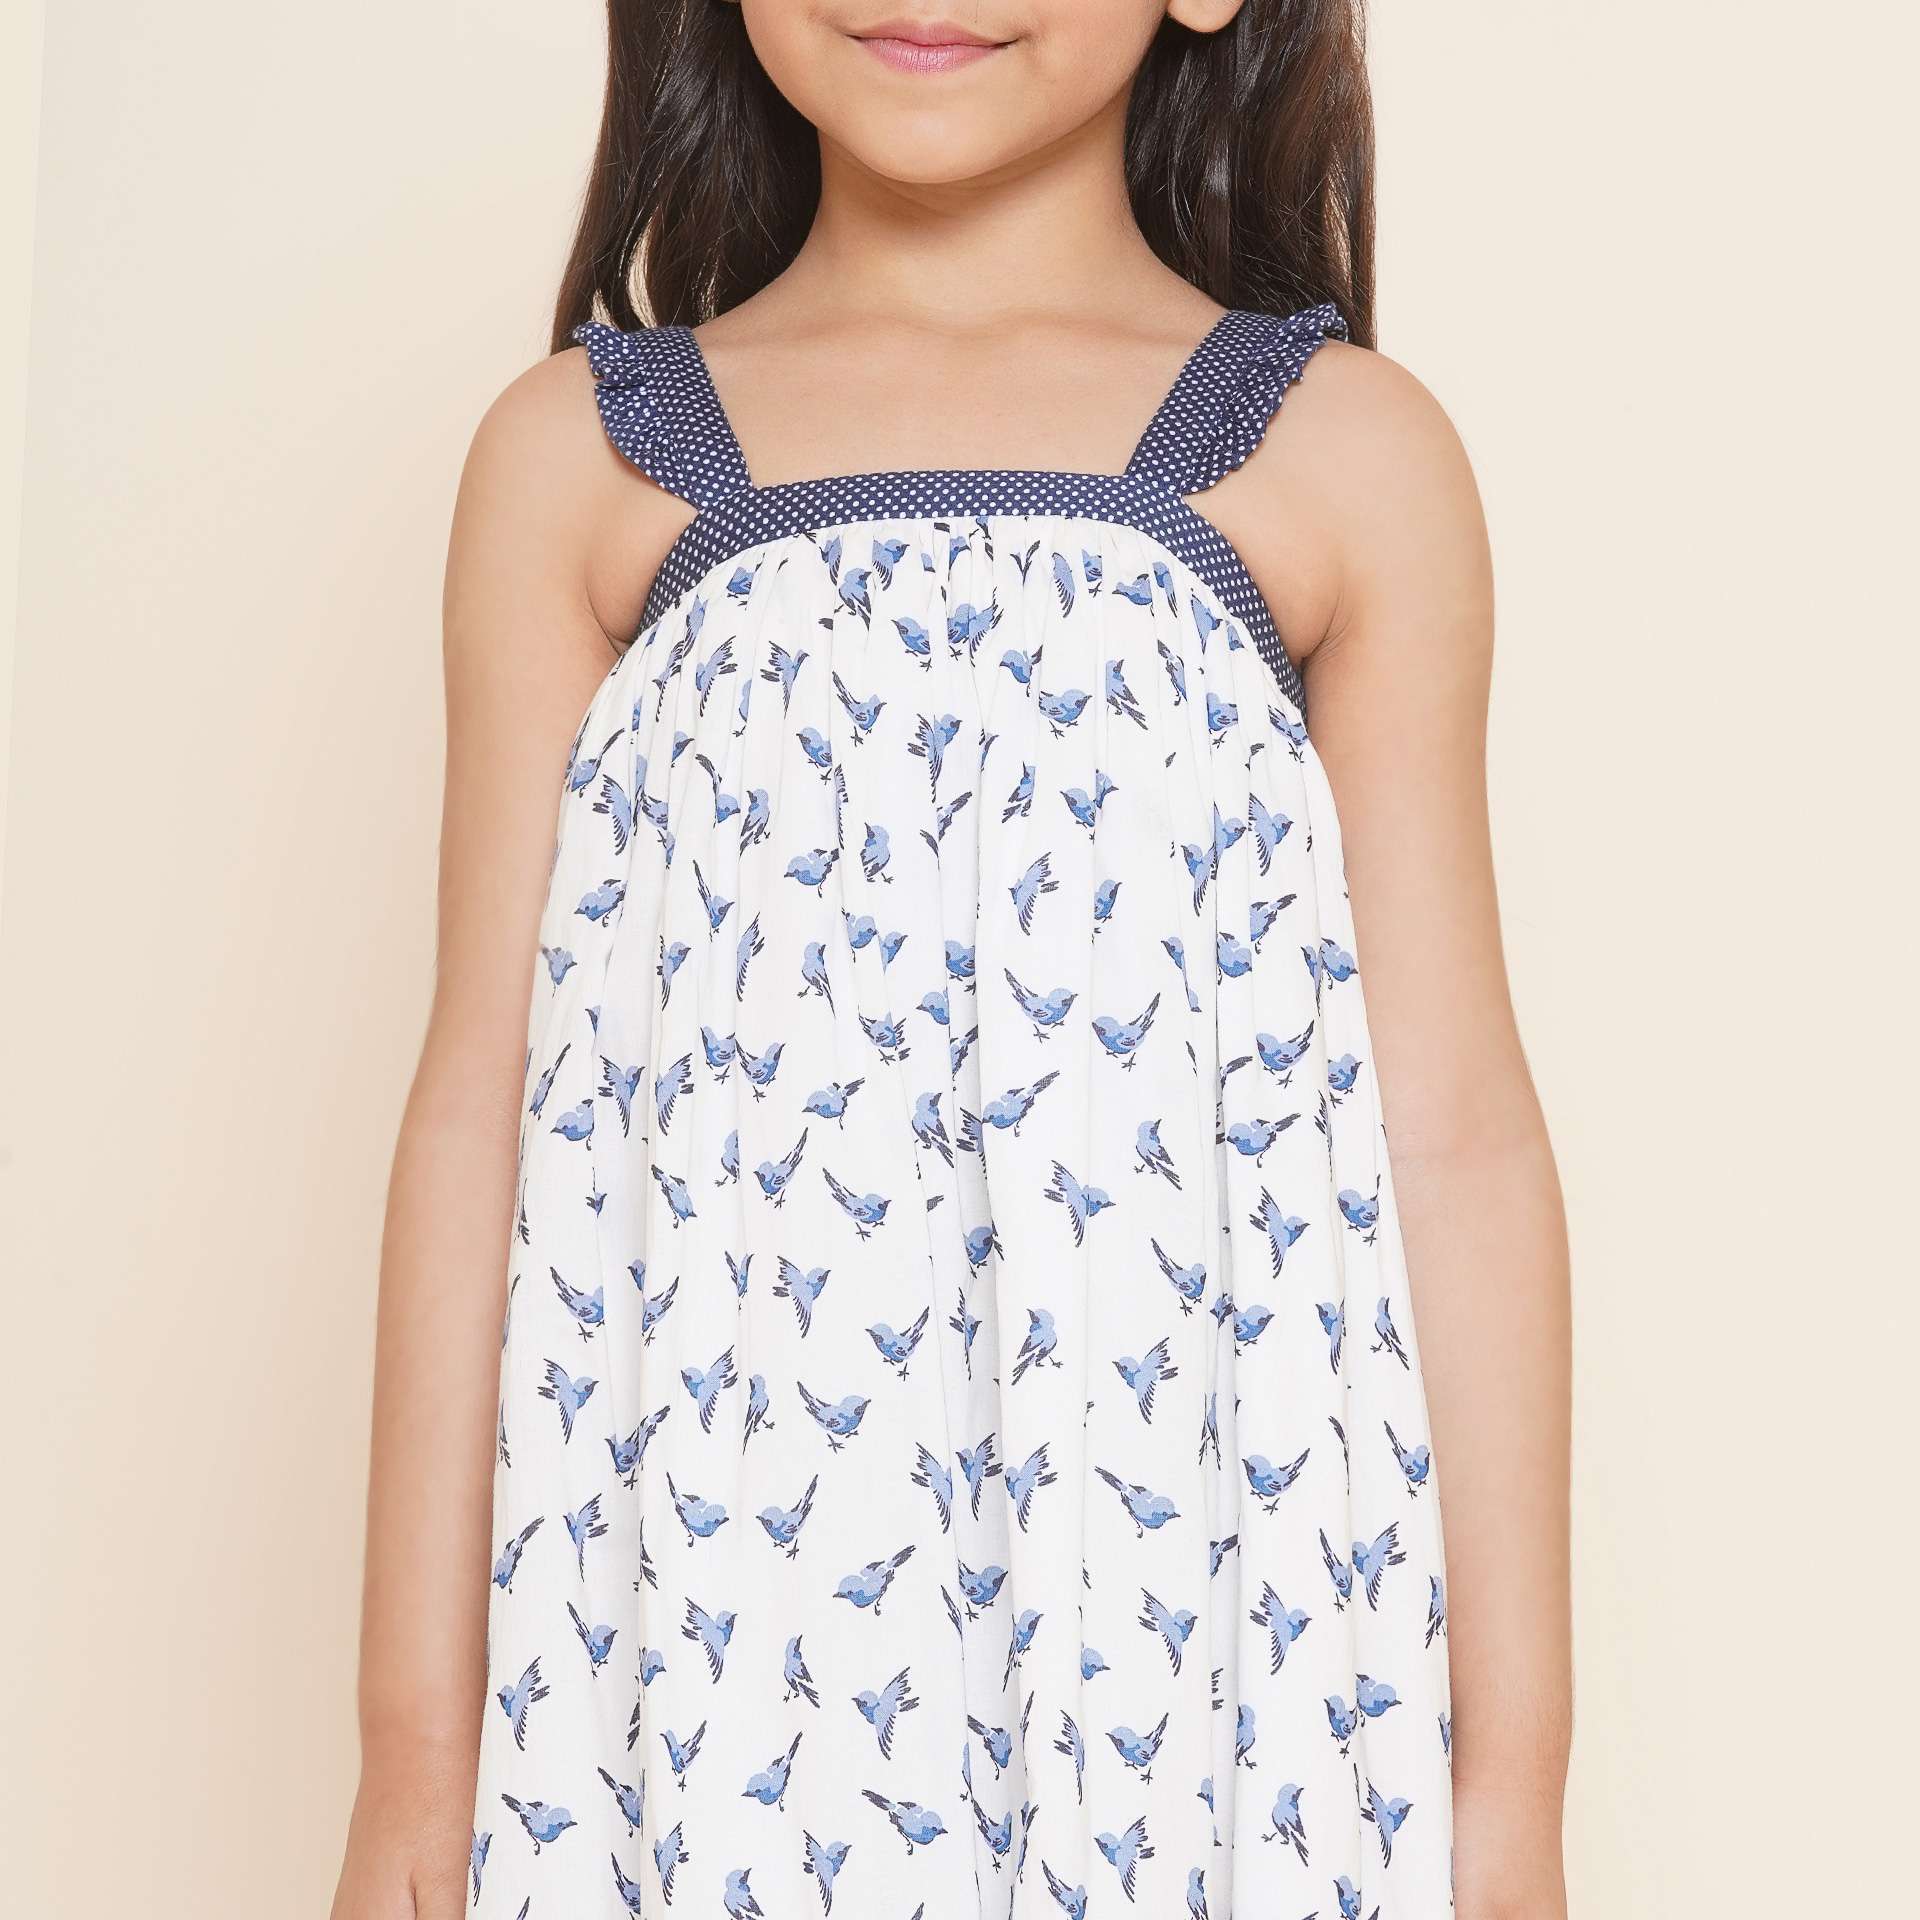 Closeup shot of a girl wearing strappy shoulder dress with blue bird print and tiny ruffles on the shoulder straps